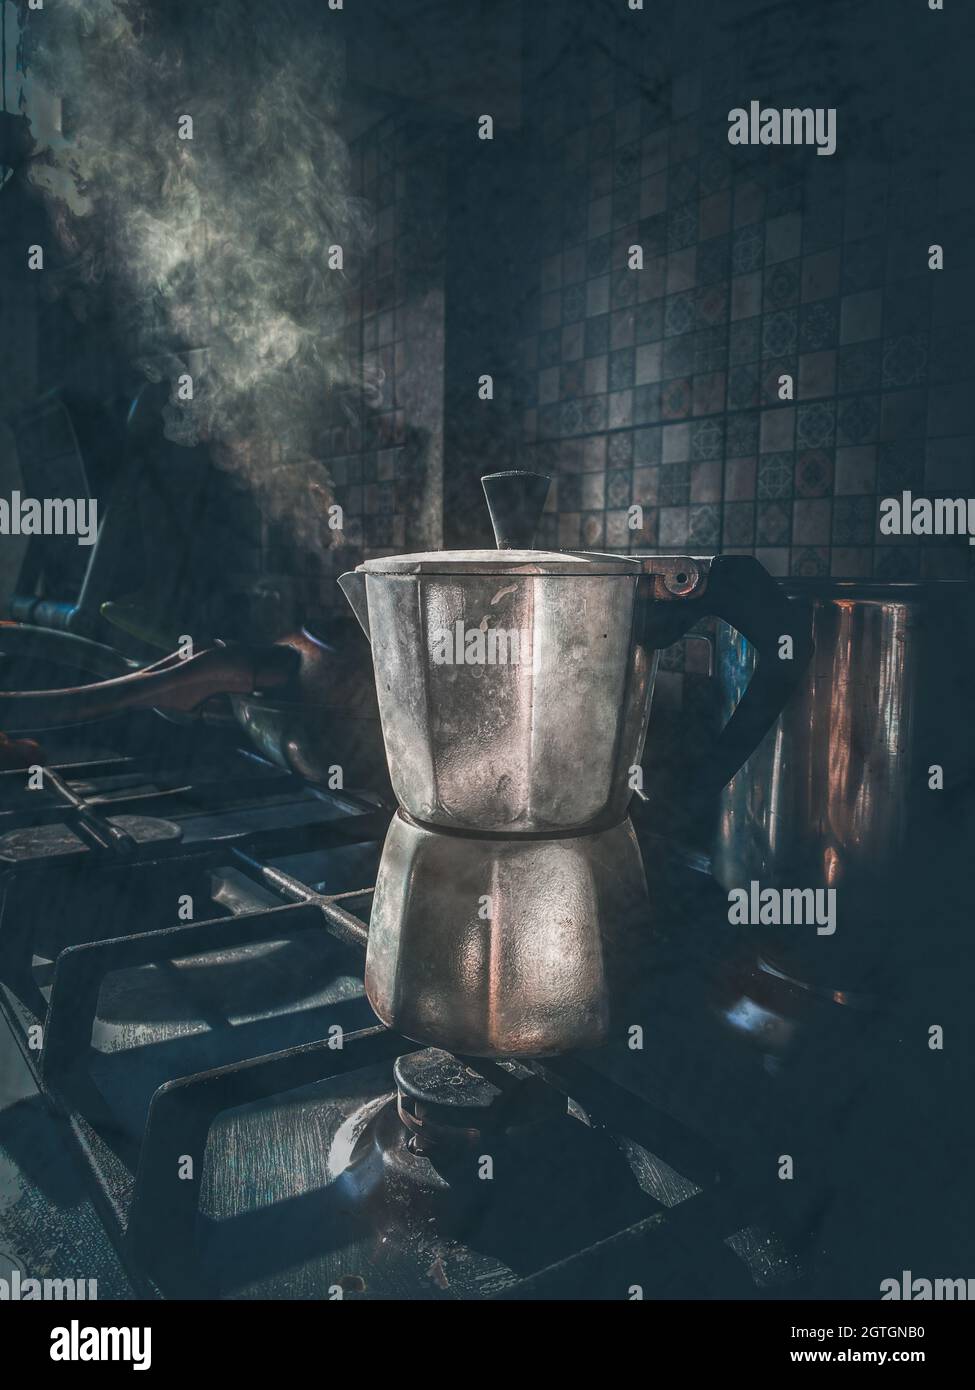 Coffeemaker with coffee boils and emits steam on the gascooker. Natural shot in low key. Stock Photo